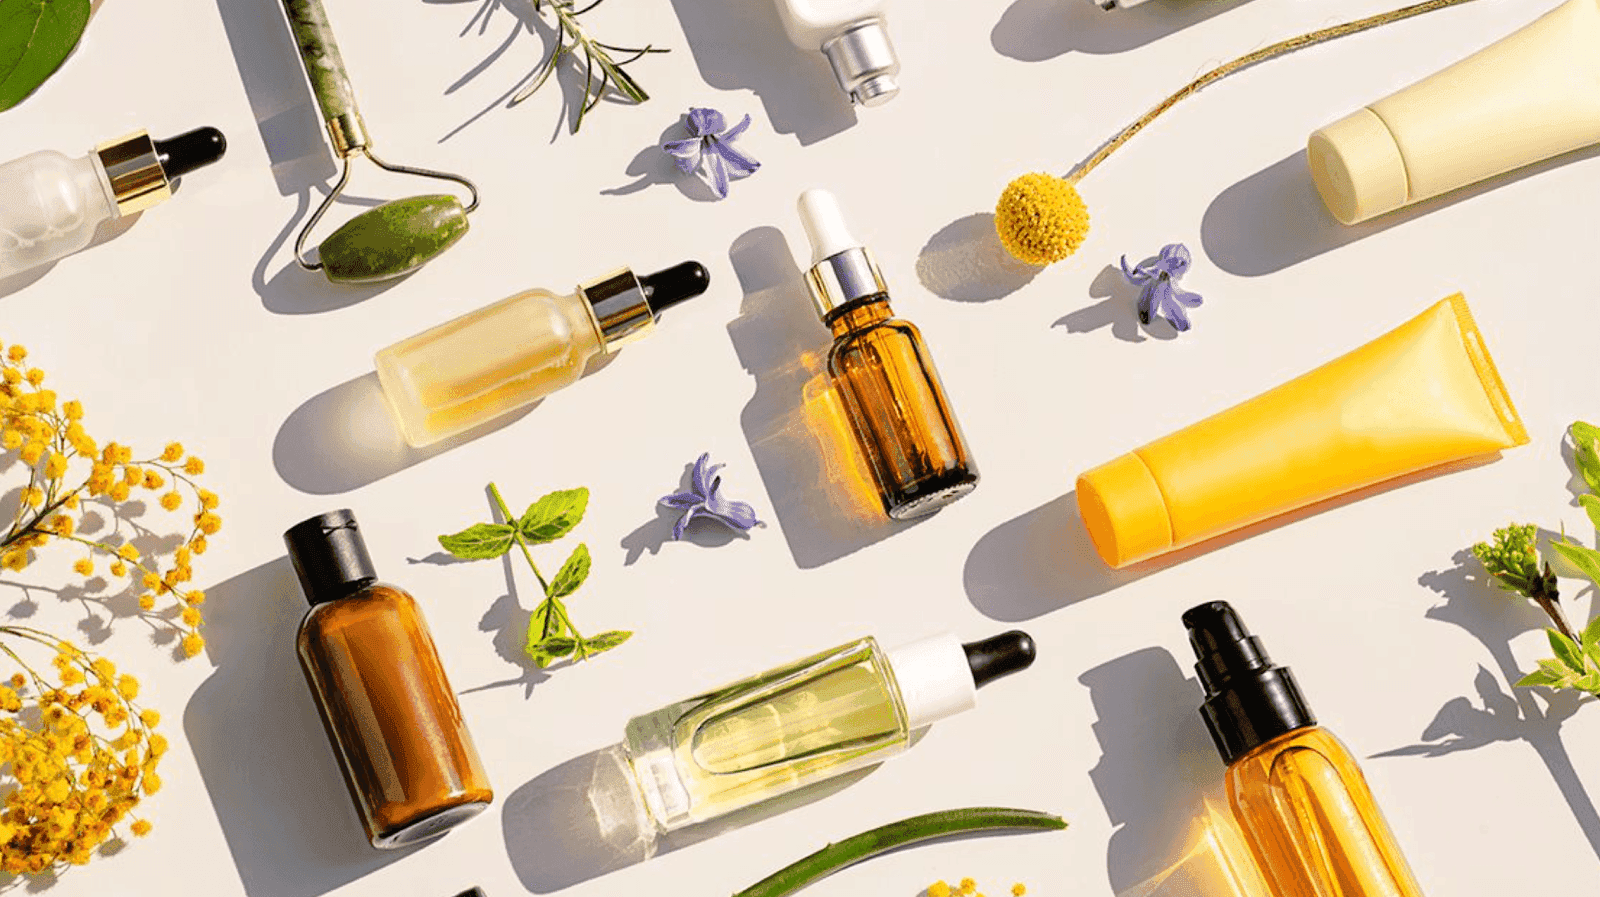 Beauty products with flowers around them